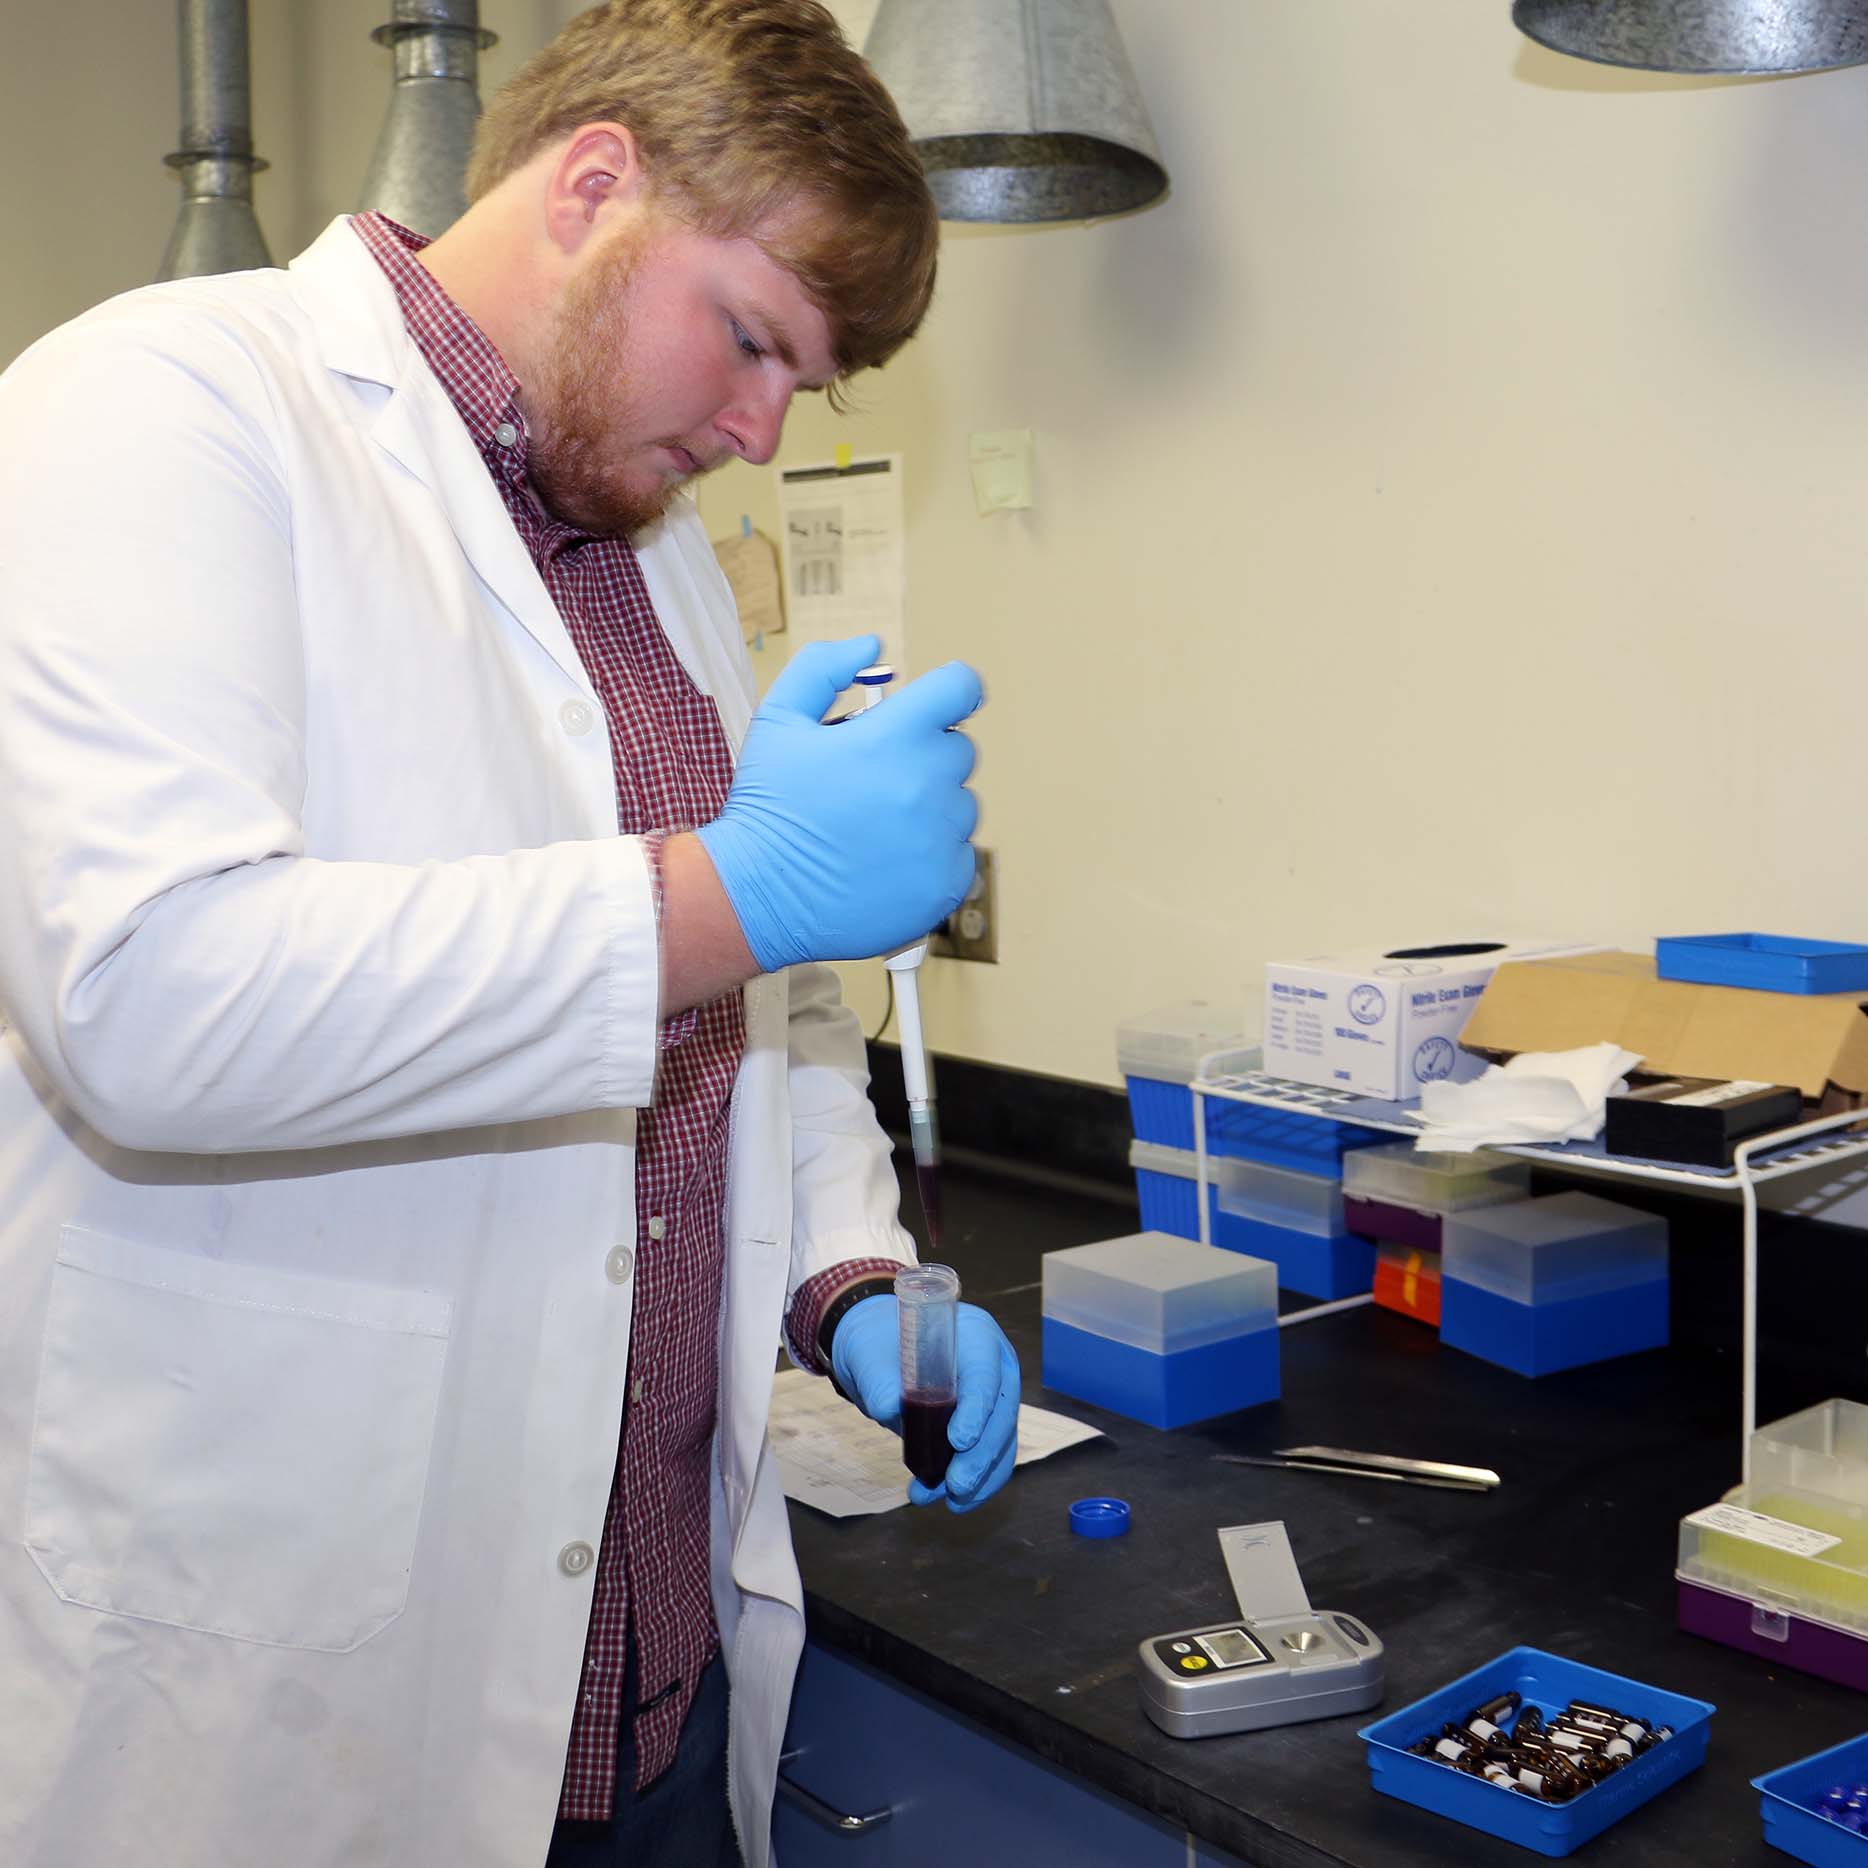 UGA Cooperative Extension Agricultural and Environmental Services Laboratories lab technician Caleb Stephenson compares prepares grape juice samples for testing as part of the lab's wine grape testing program.